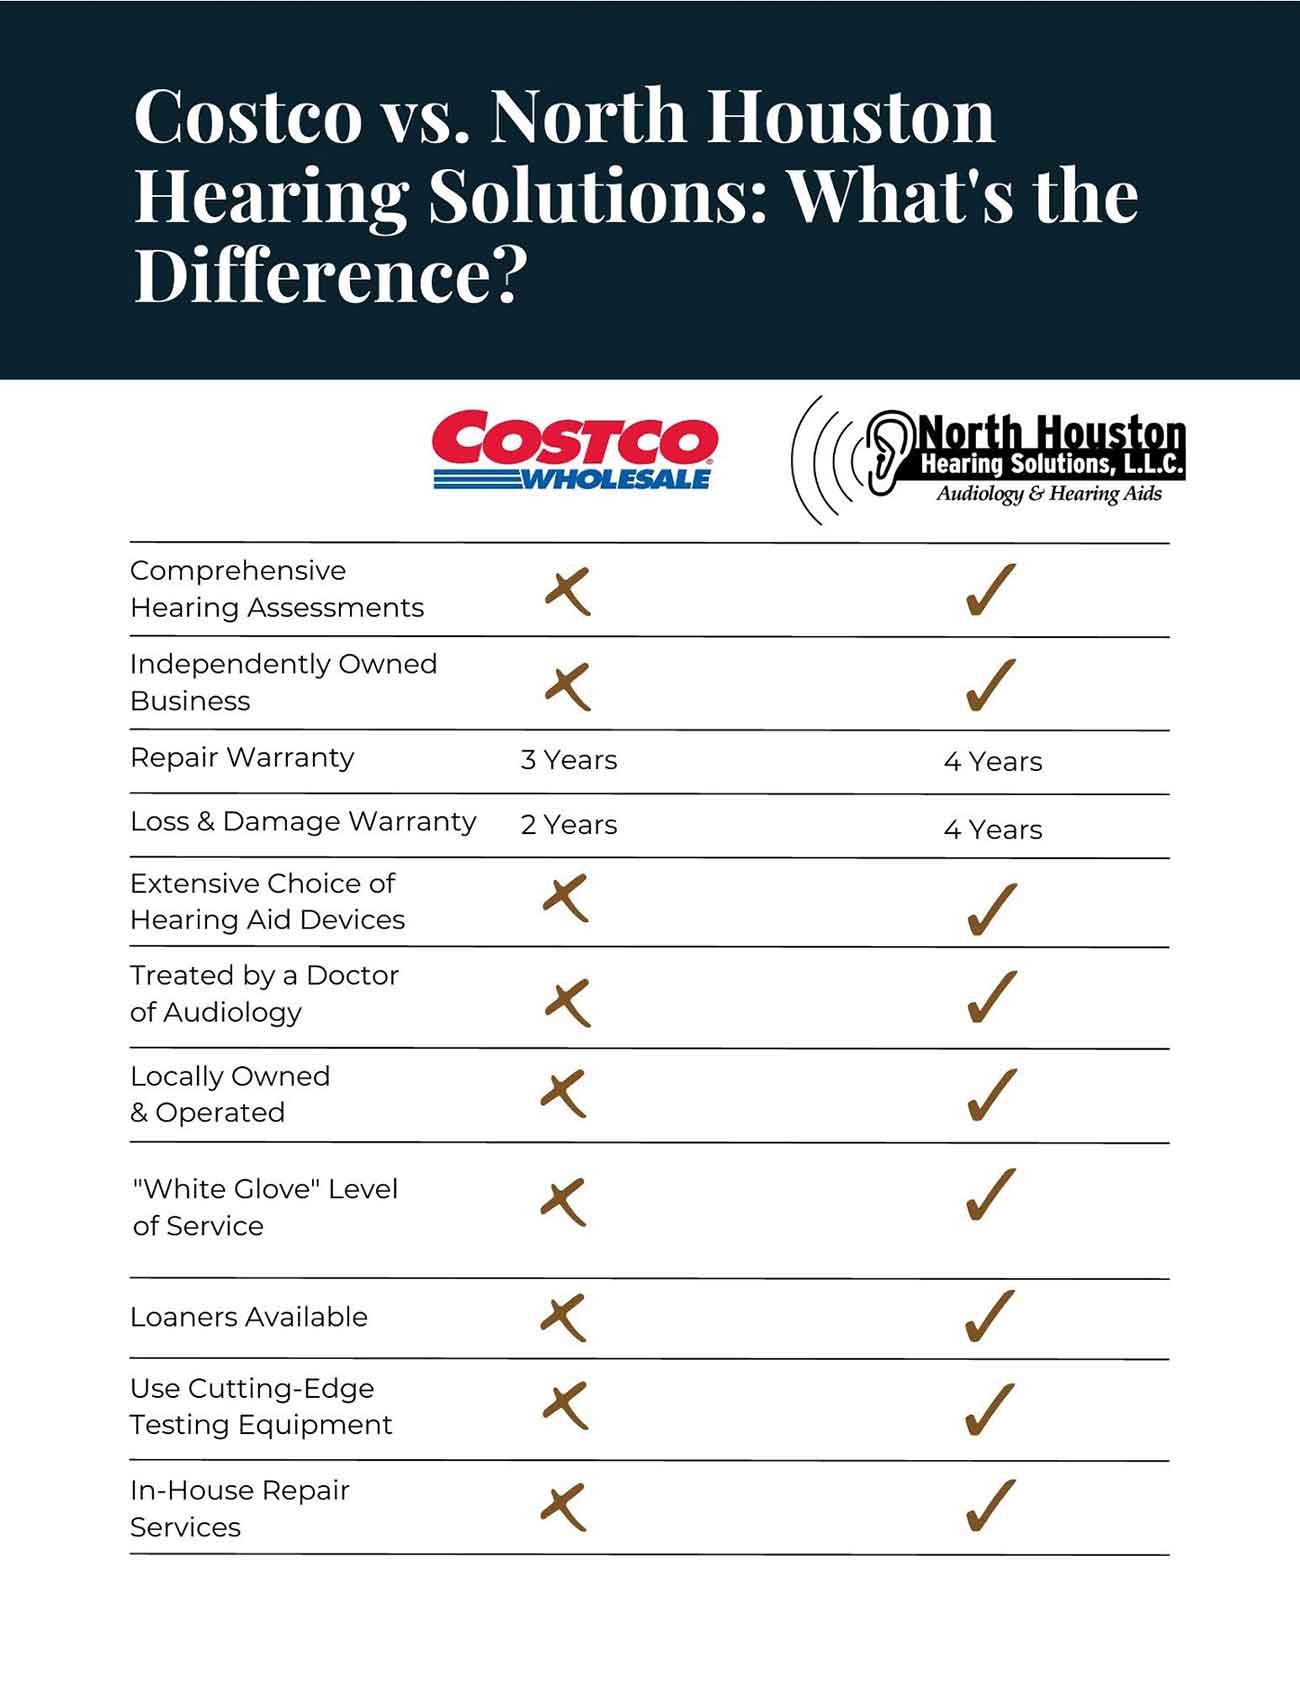 Difference between Costco vs. North Houston Hearing